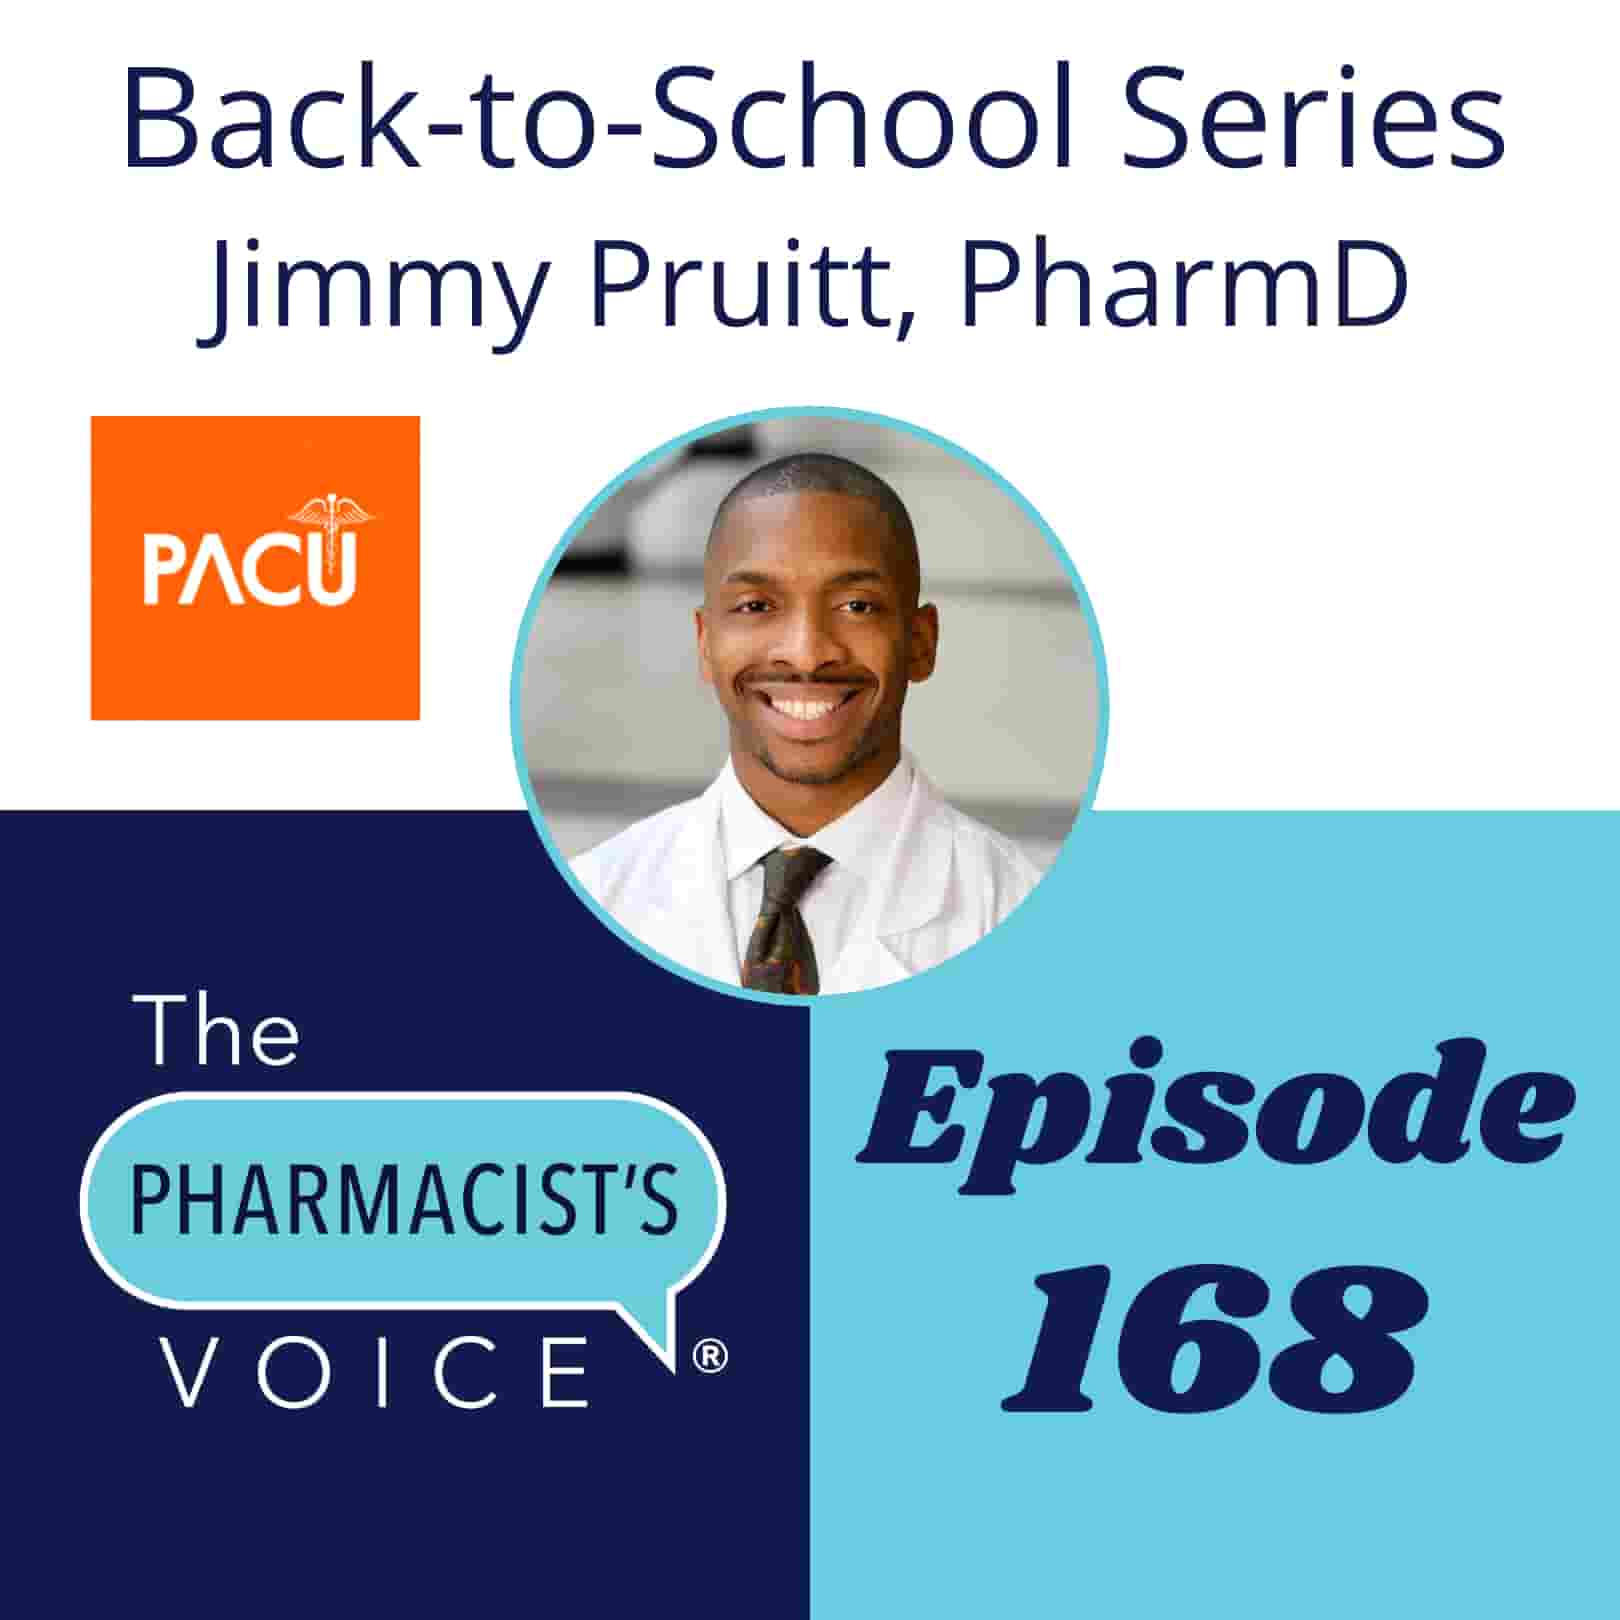 Episode artwork for The Pharmacist's Voice Podcast. To learn more, visit https://www.thepharmacistsvoice.com. Colors are light blue, navy blue, and white.